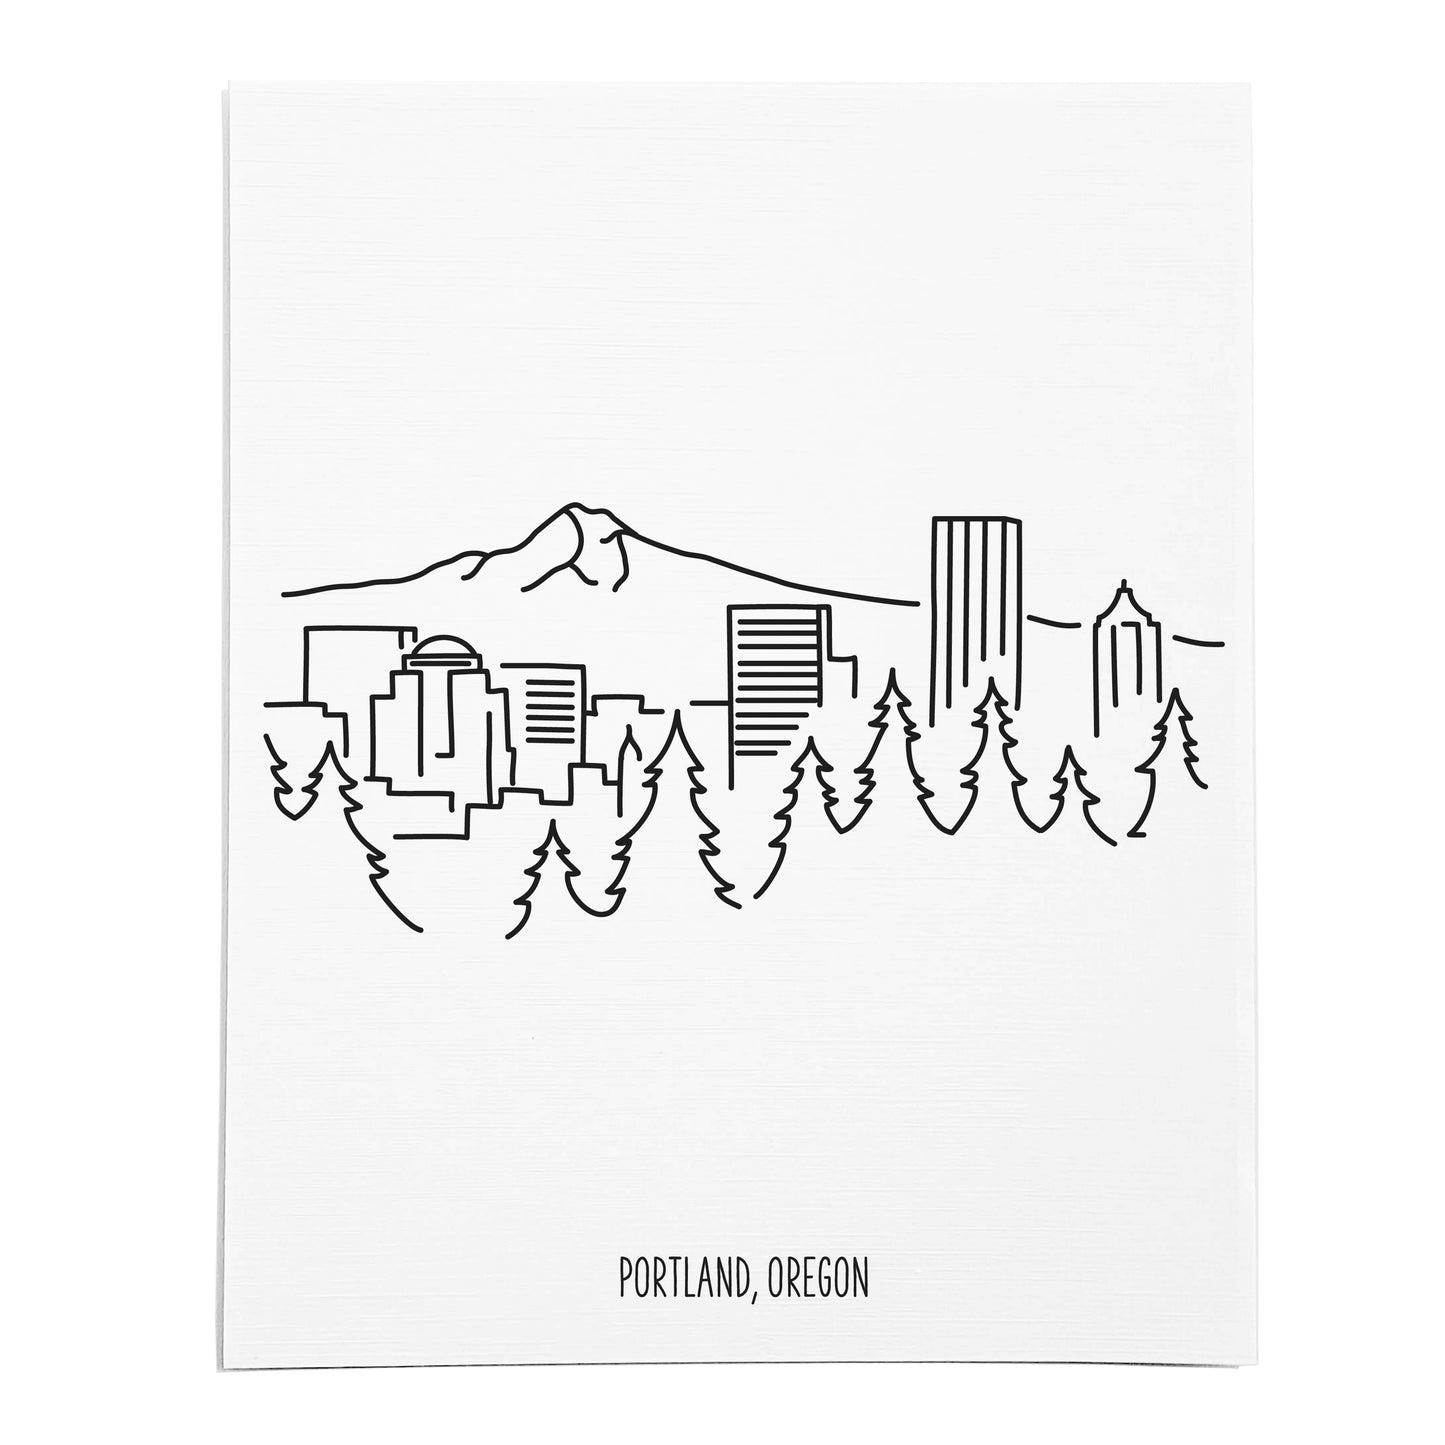 An art print featuring a line drawing of the Portland Skyline on white linen paper